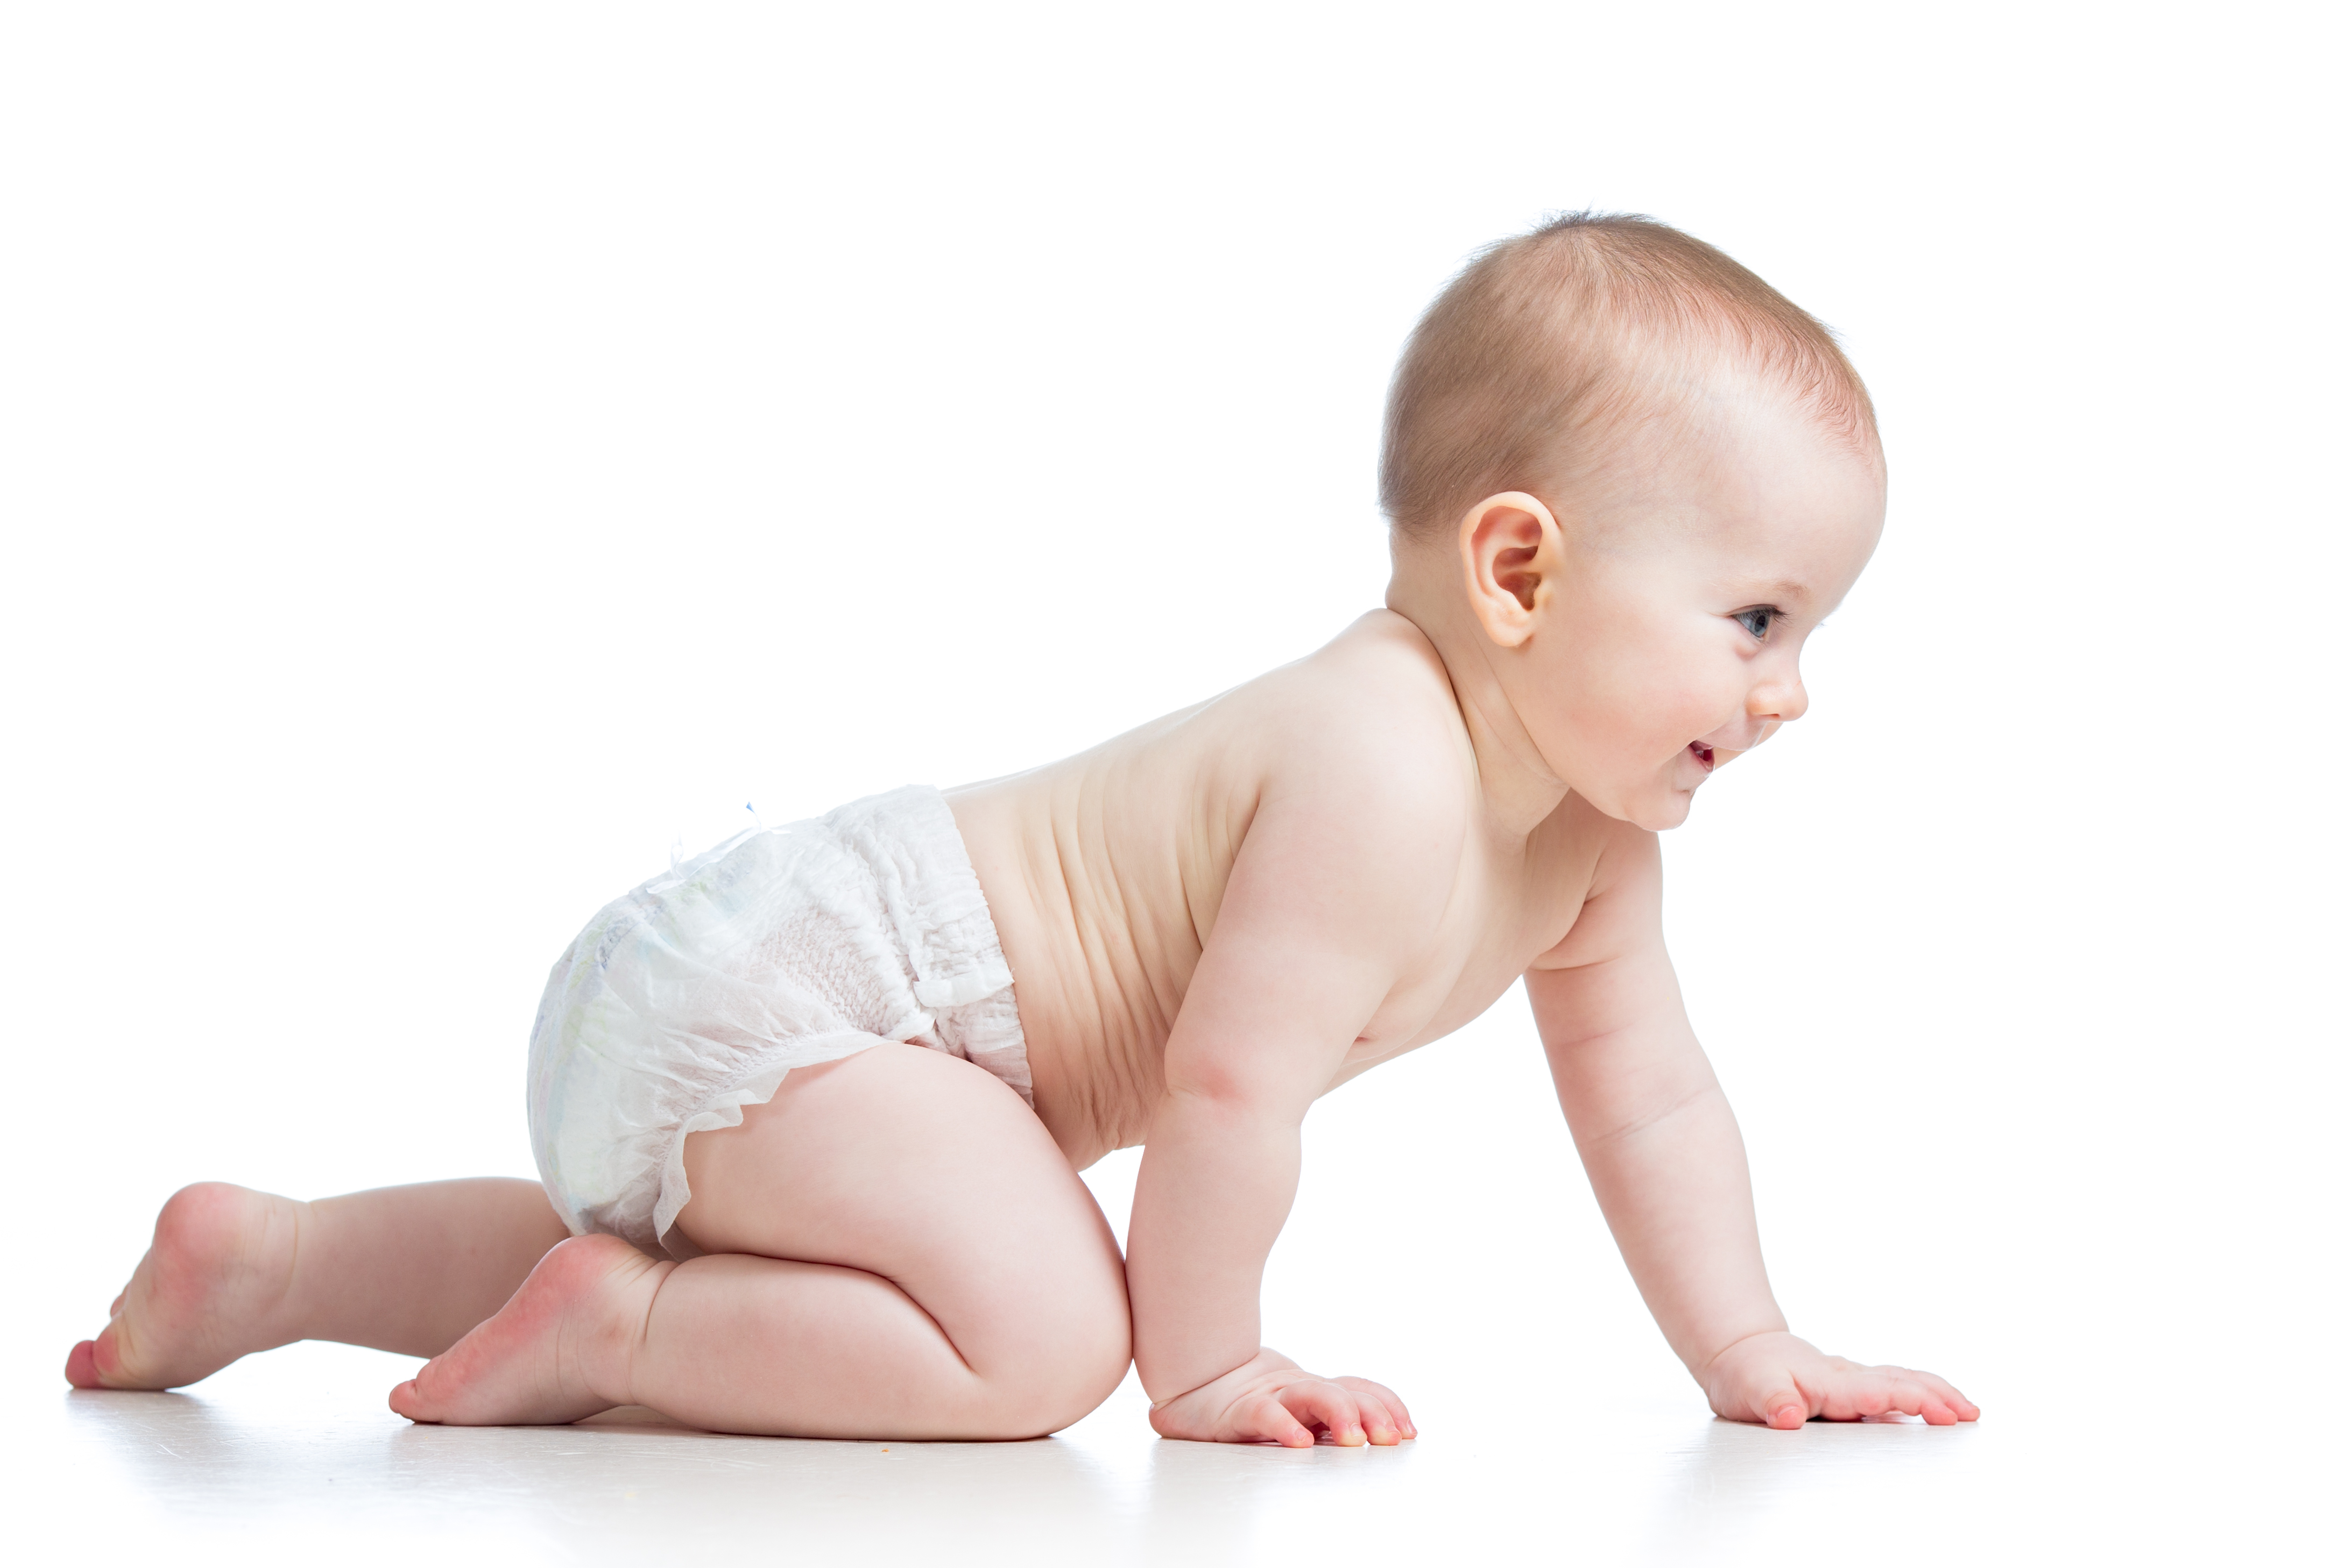 Will any crawling style do? | Mind Moves Institute